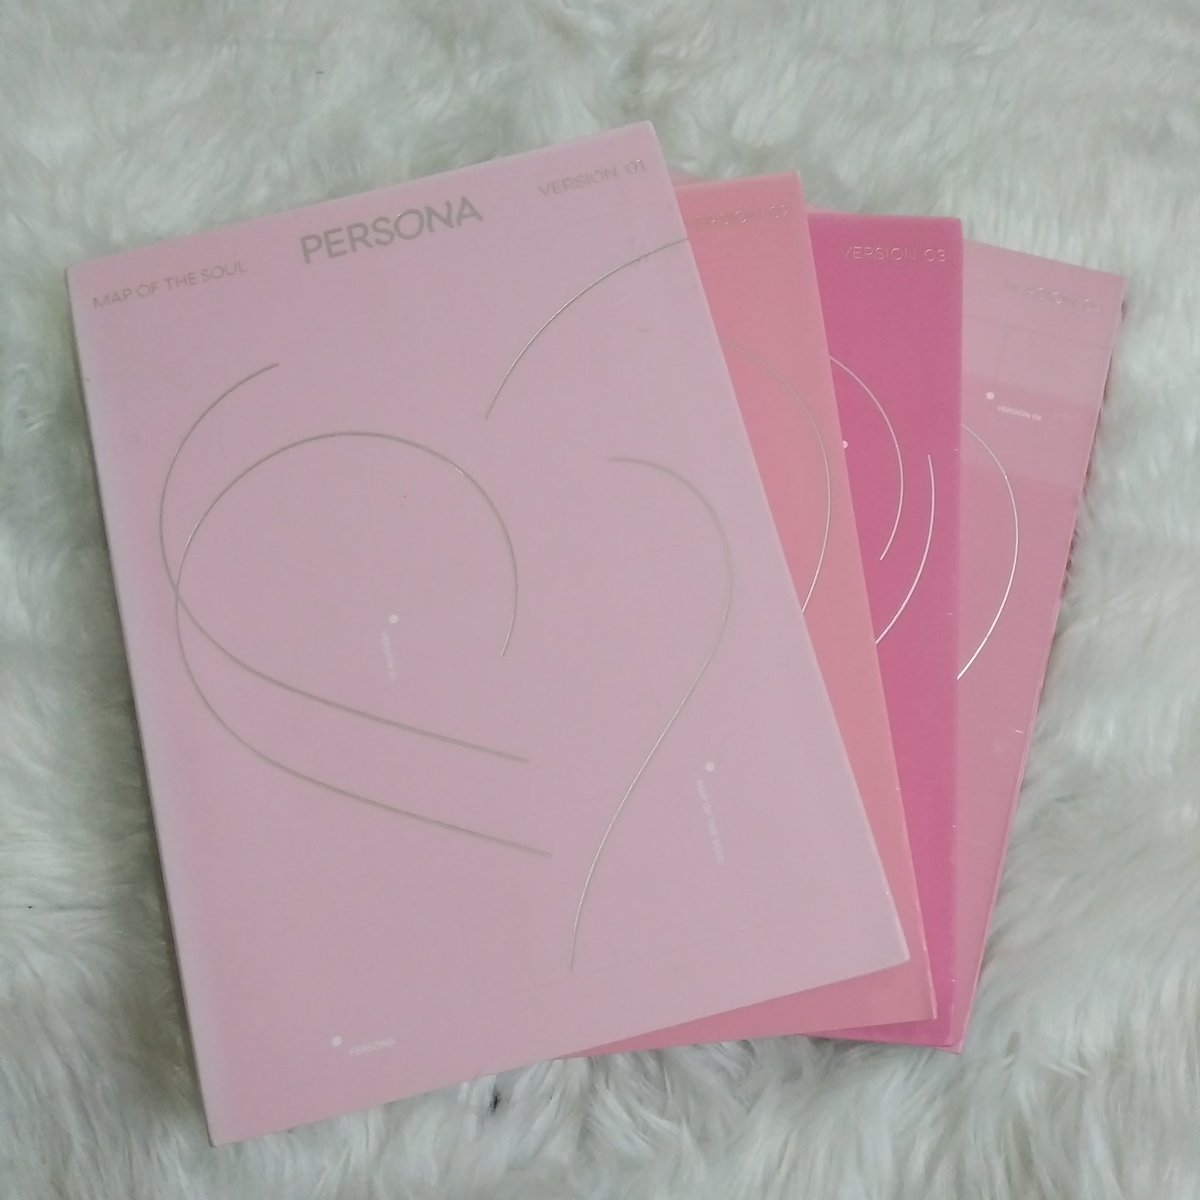 BTS Persona Album sponsored by  @pitapatph Mechanics:- mbf  @FromFansForFans and  @pitapatph, tag 2 mutuals- proof of streaming Dynamite MV- must be an ARMY - one winner per version = 4 winners